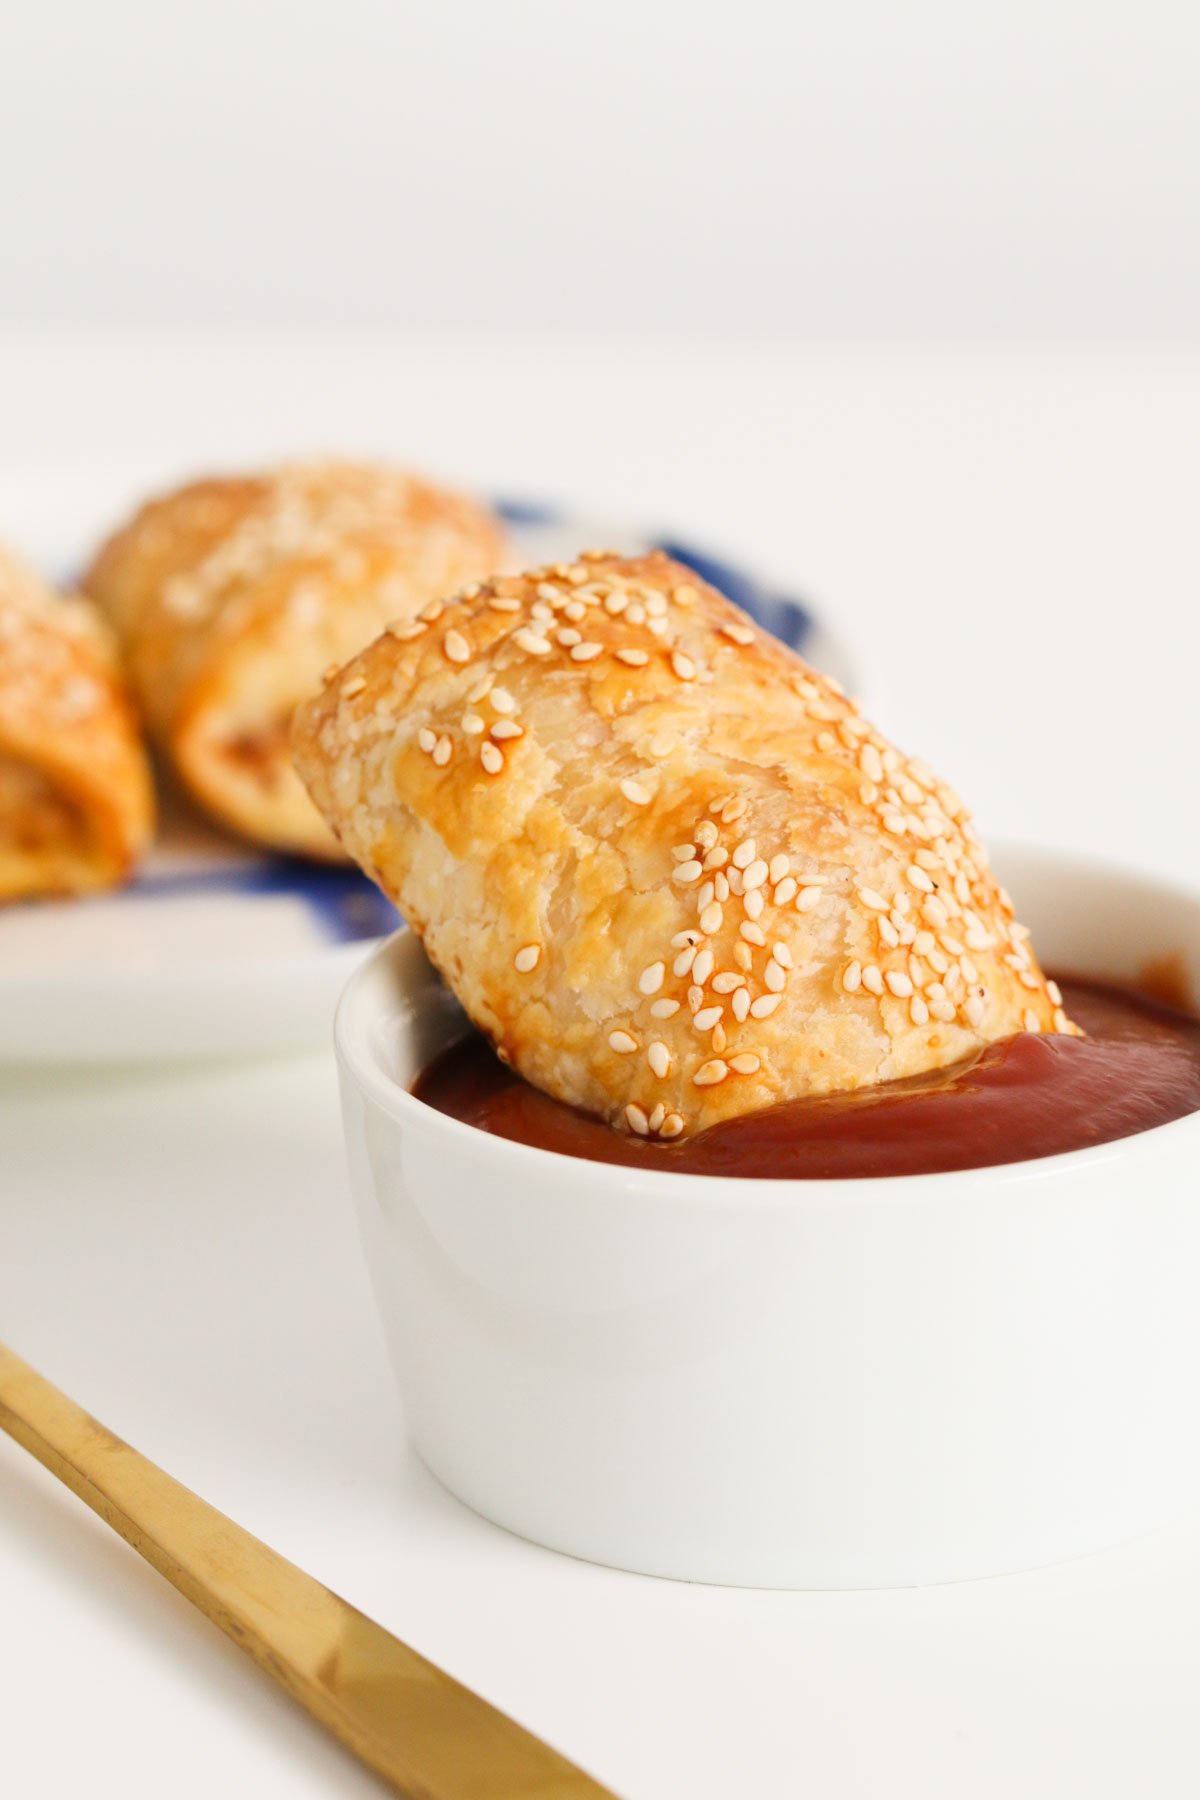 A puff pastry roll covered in sesame seeds with one end dipped in a small bowl of tomato sauce.